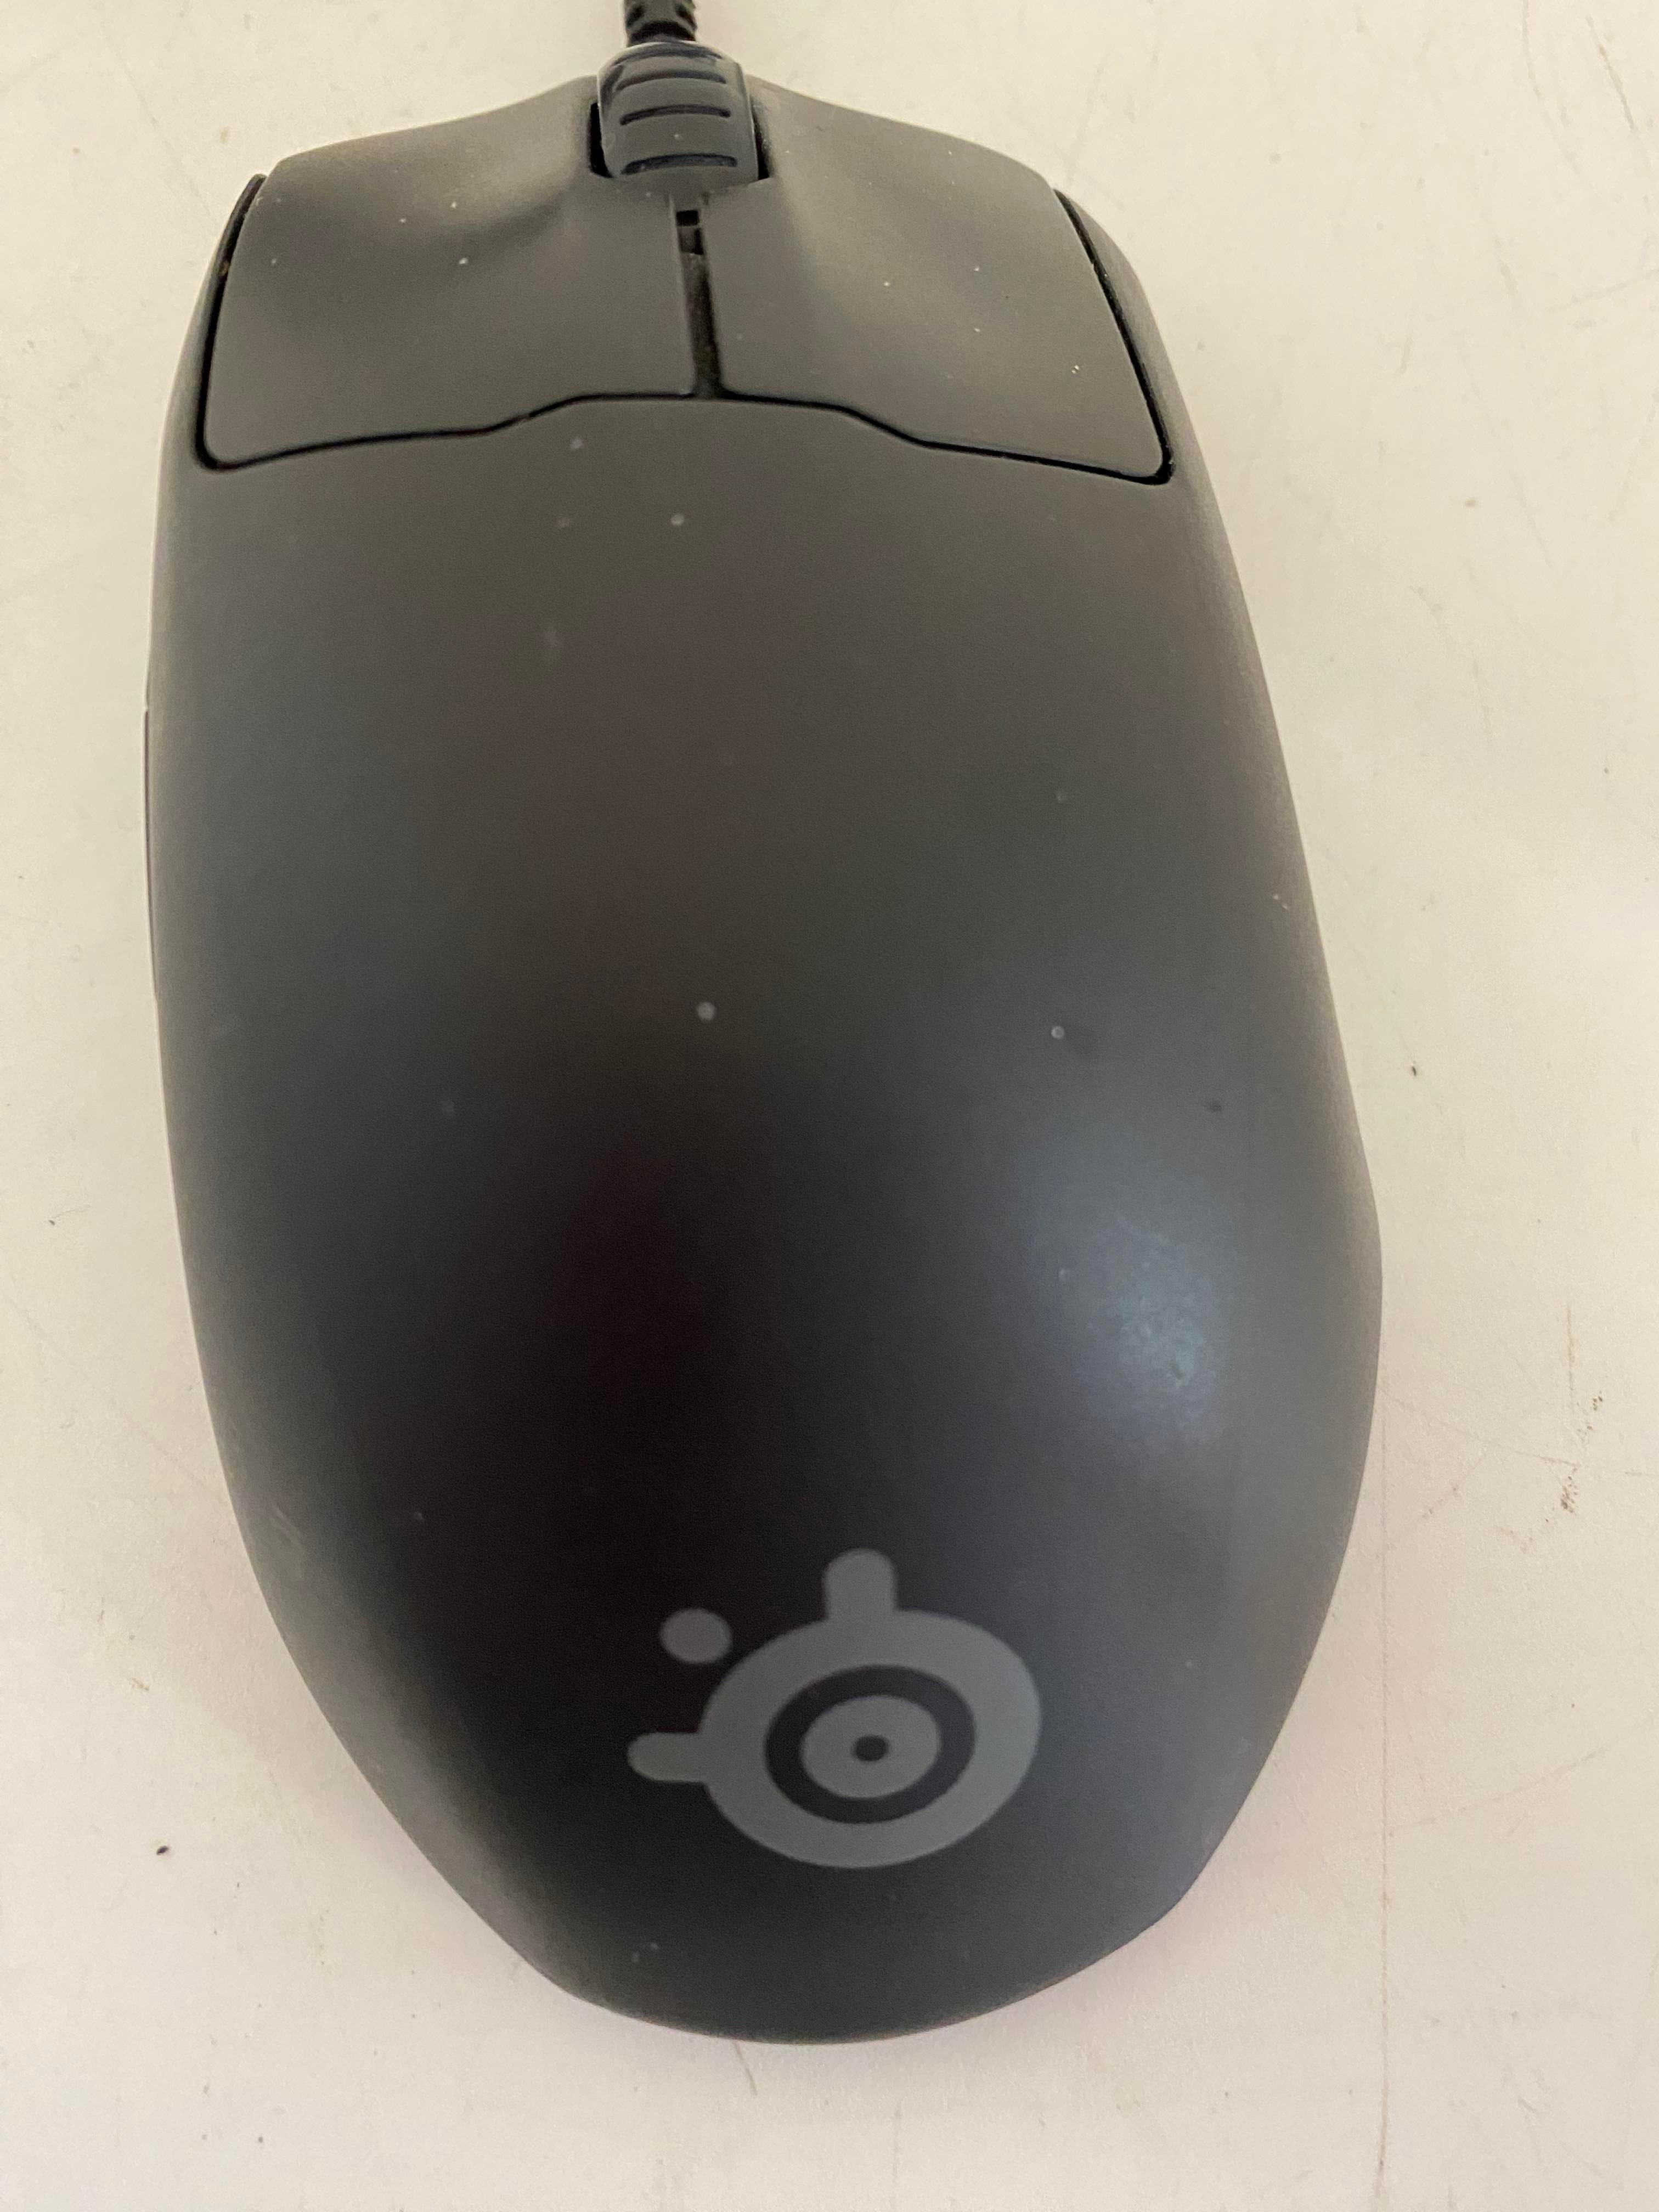 Steelseries Prime + Wired Gaming Mouse